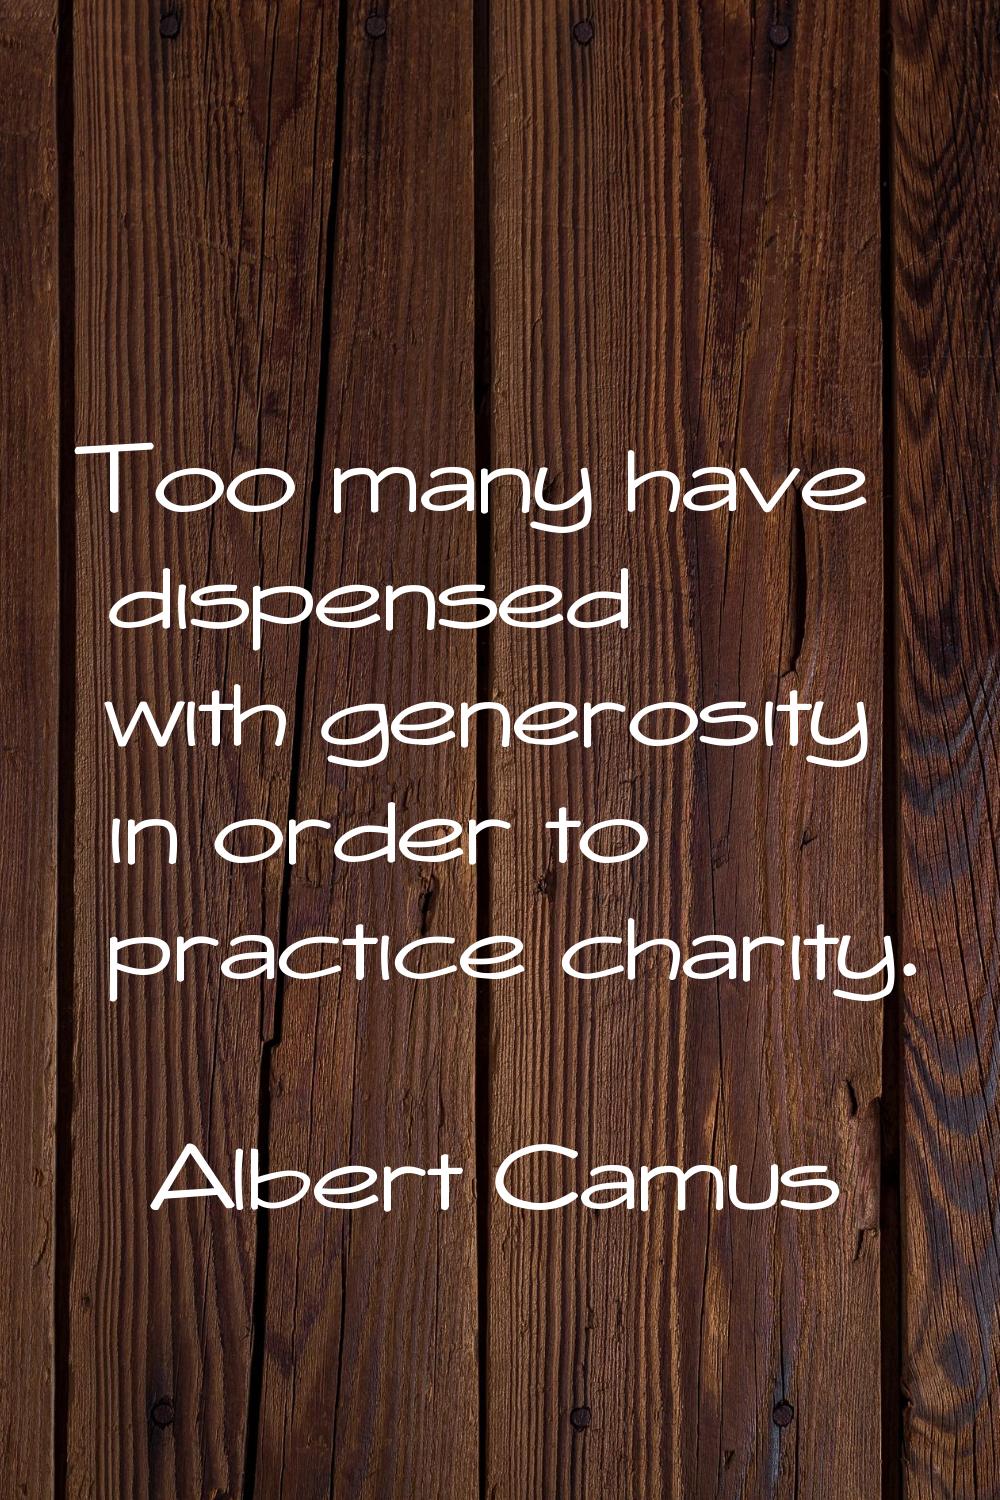 Too many have dispensed with generosity in order to practice charity.